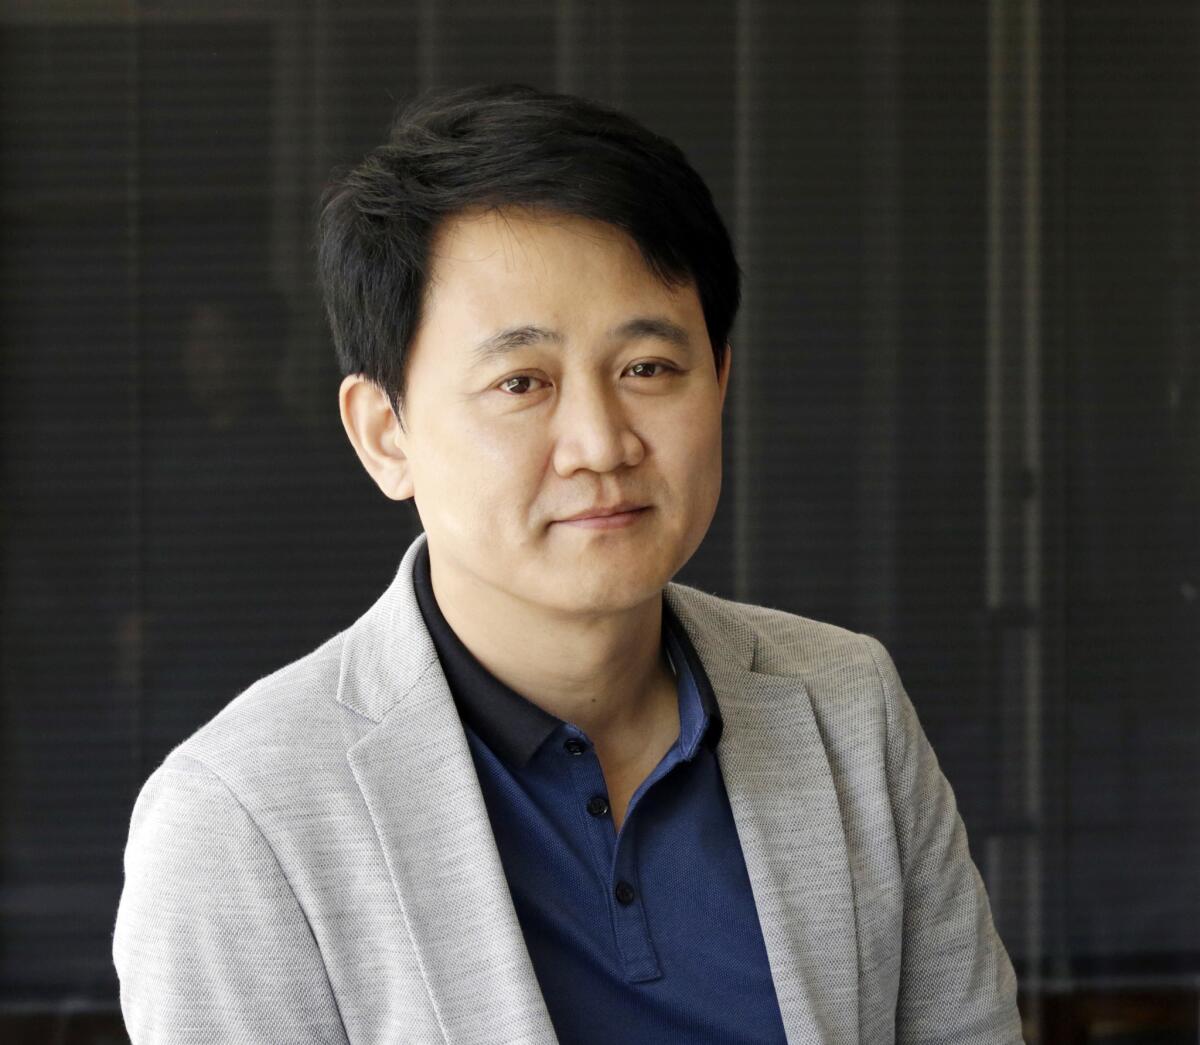 Netmarble Games Corp. Chairman and Founder Jun-hyuk Bang seeks to aggressively spend on the development and marketing of new games over the next two years to keep pace with intensifying competition.